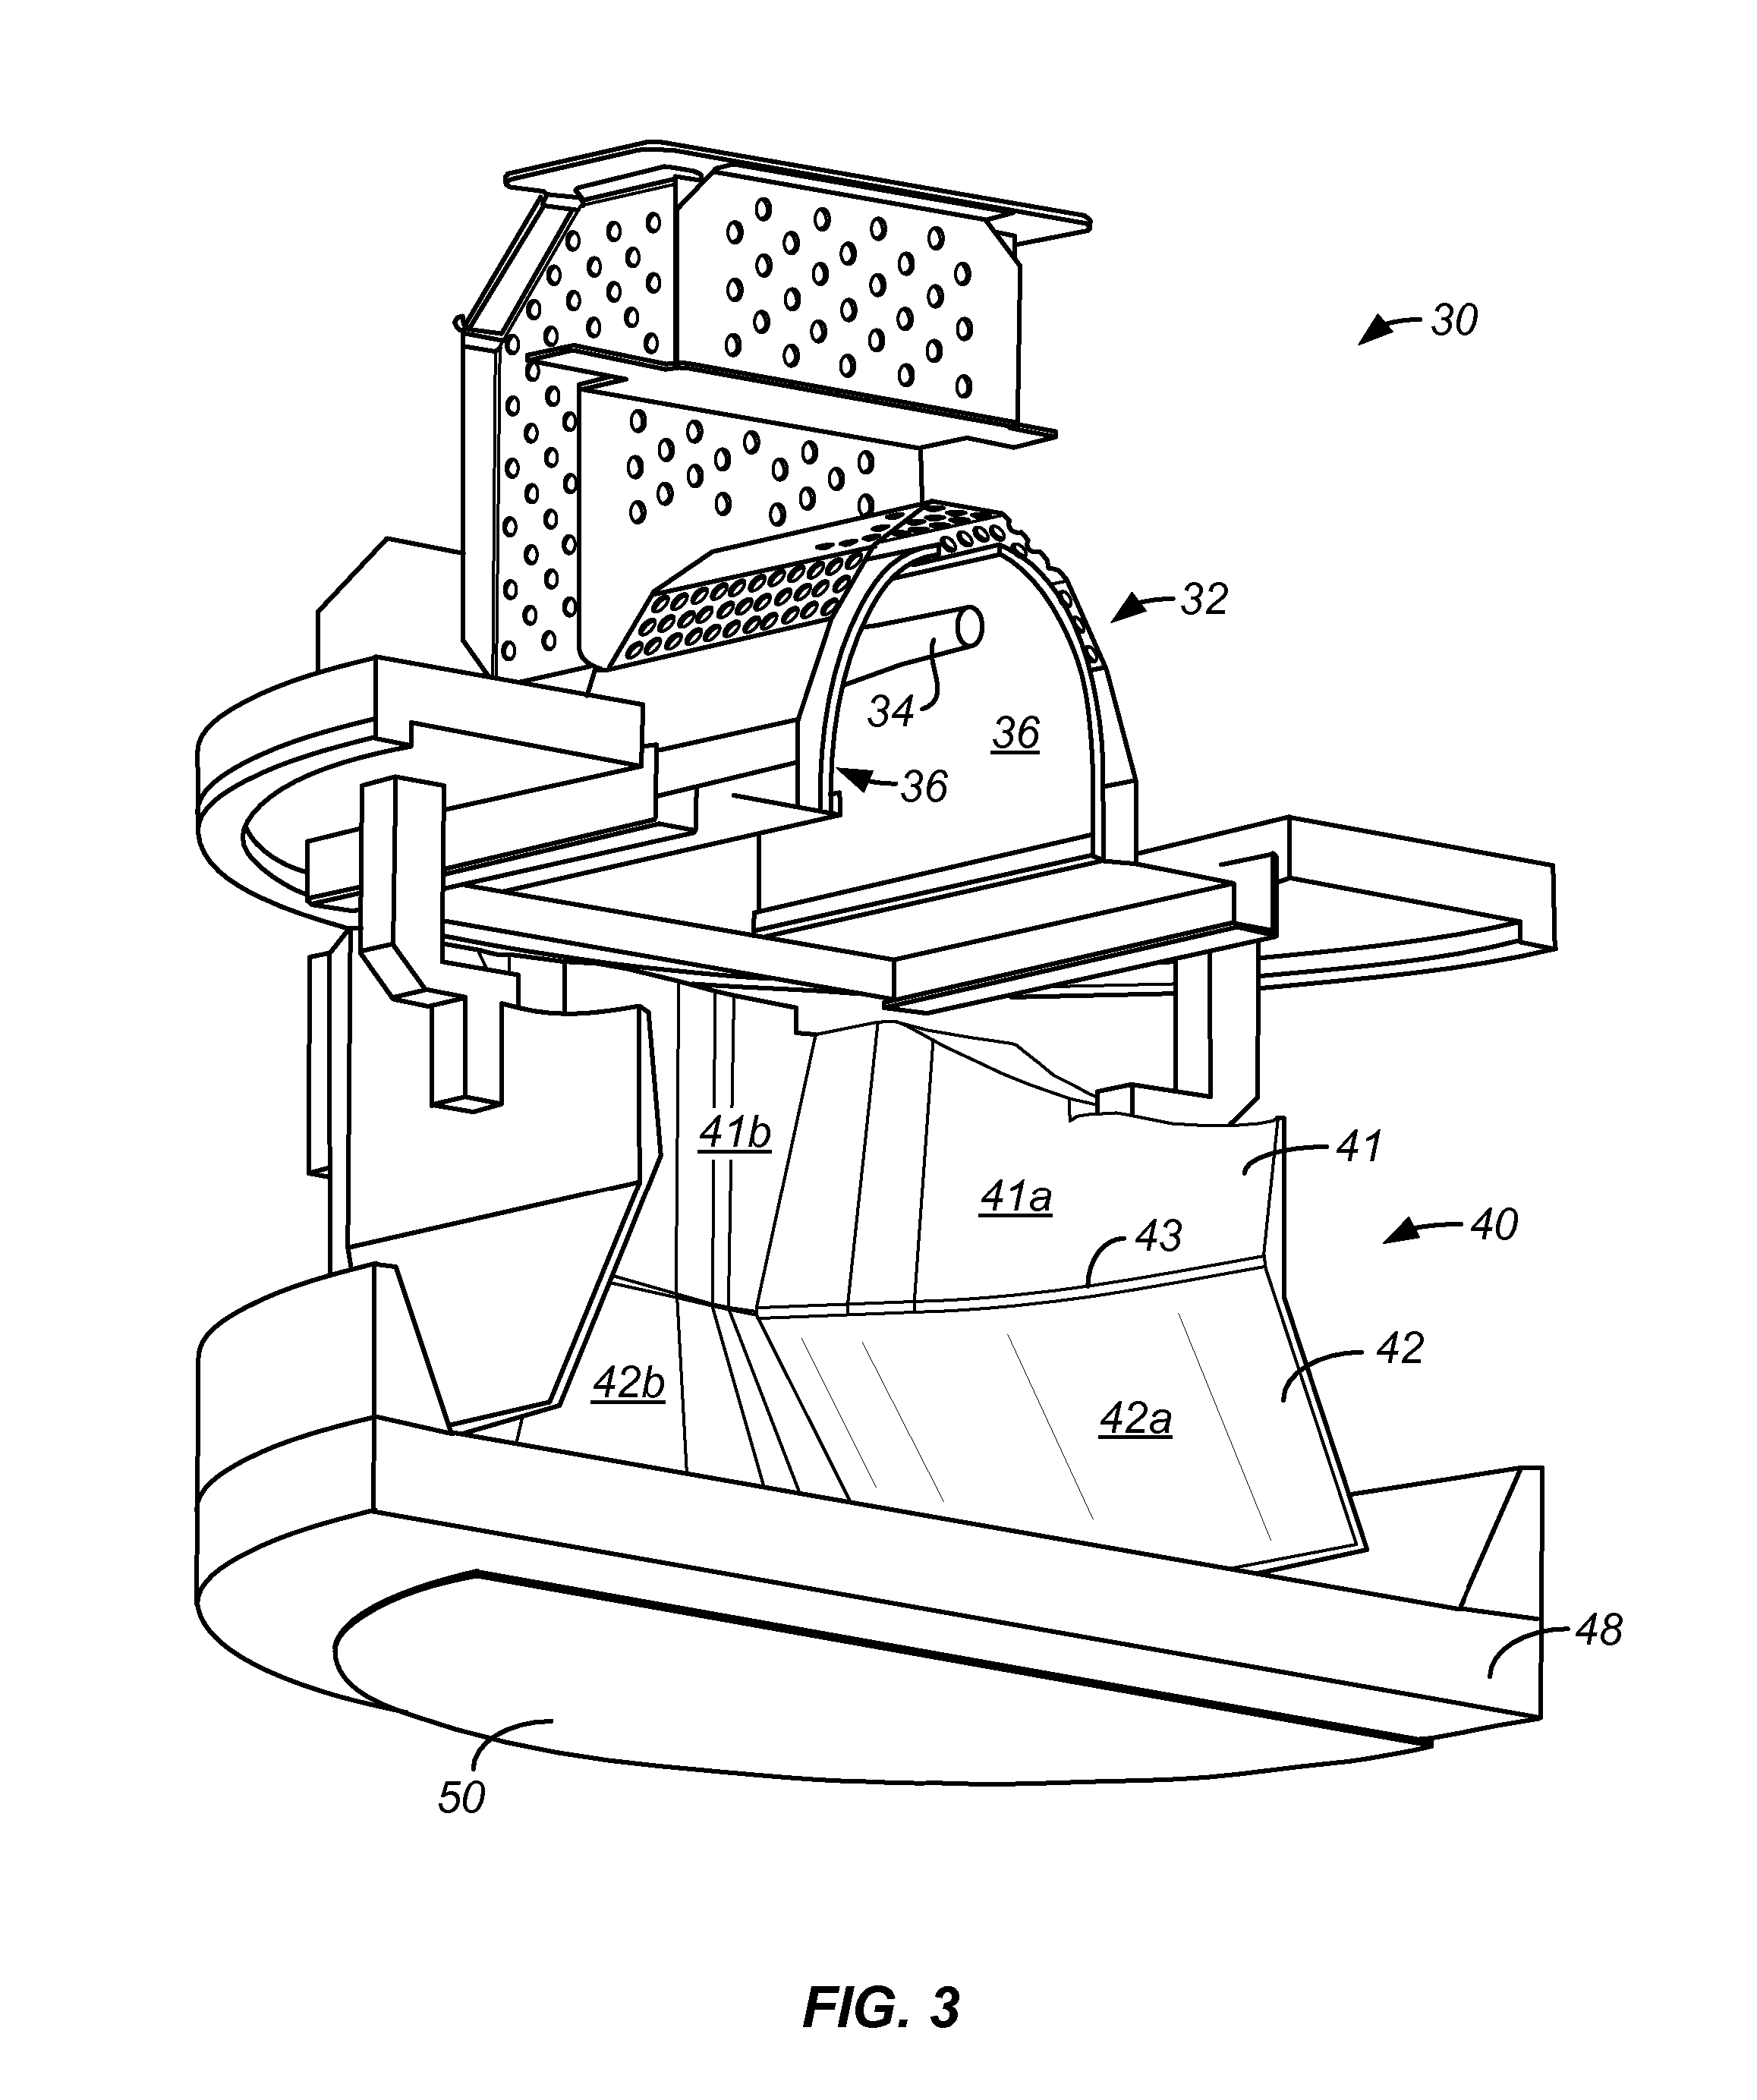 Apparatus and method for exposing a substrate to a rotating irradiance pattern of UV radiation